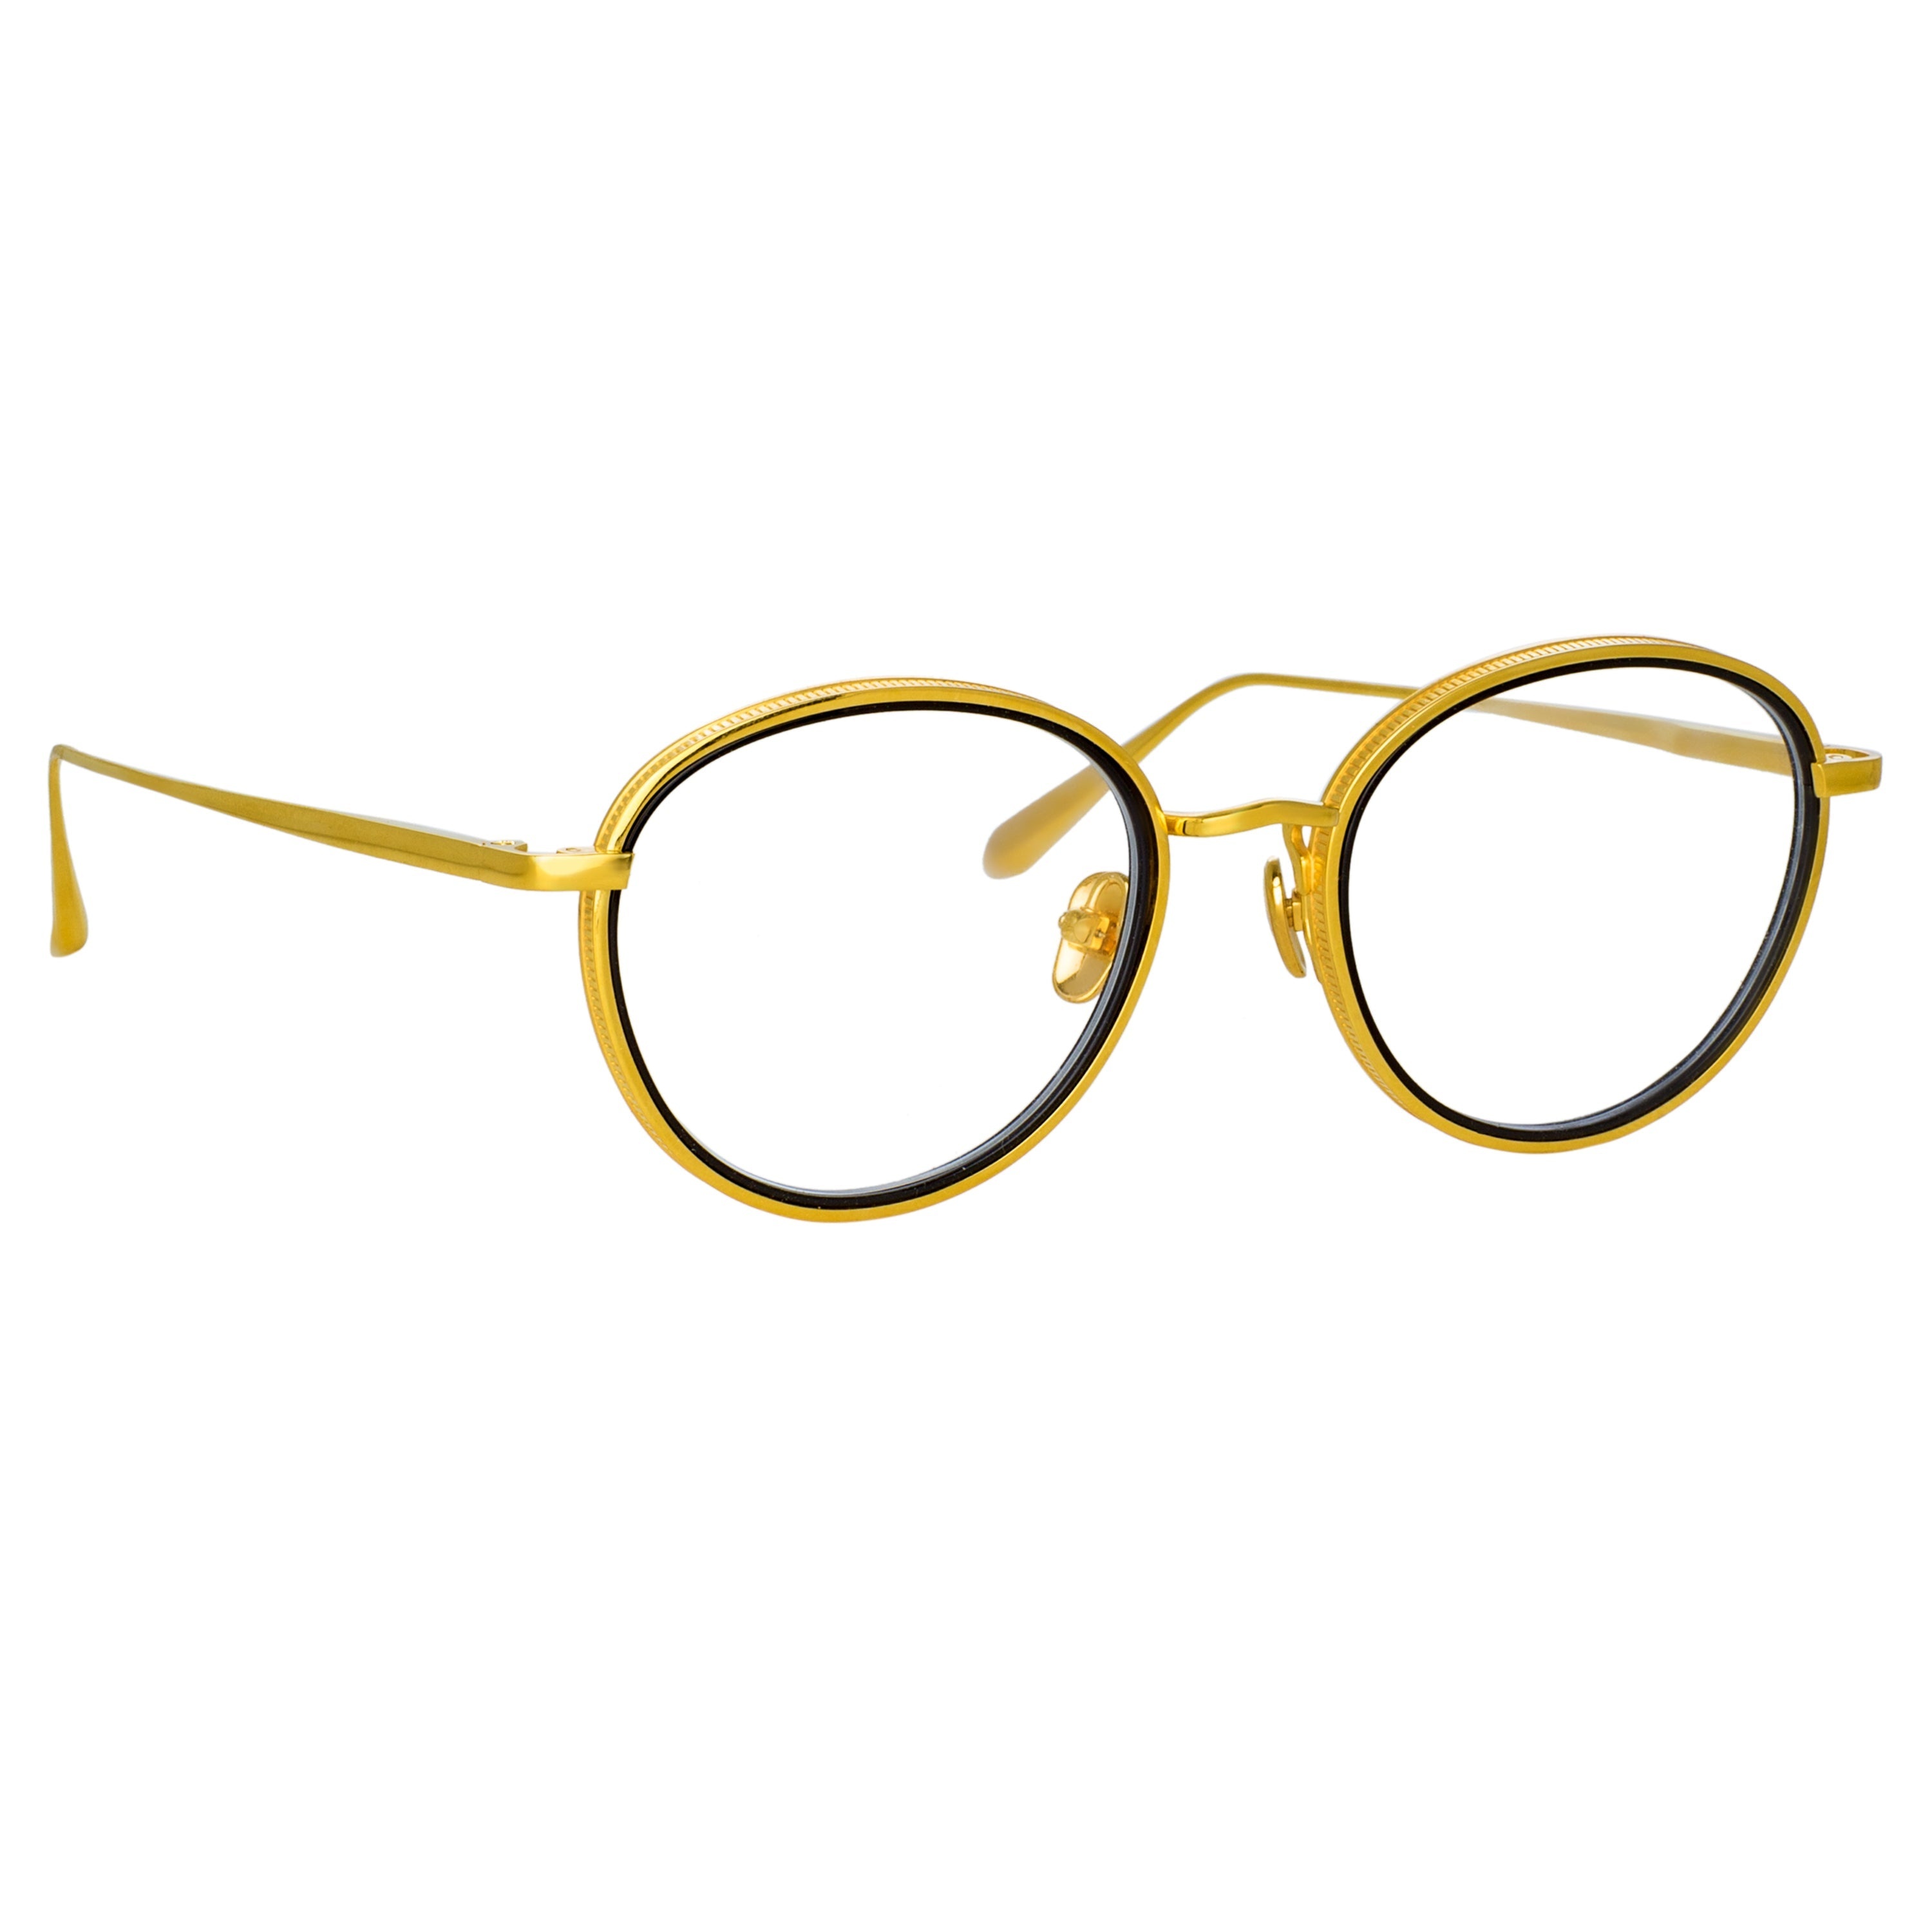 MOSS OVAL OPTICAL FRAME IN YELLOW GOLD - 5